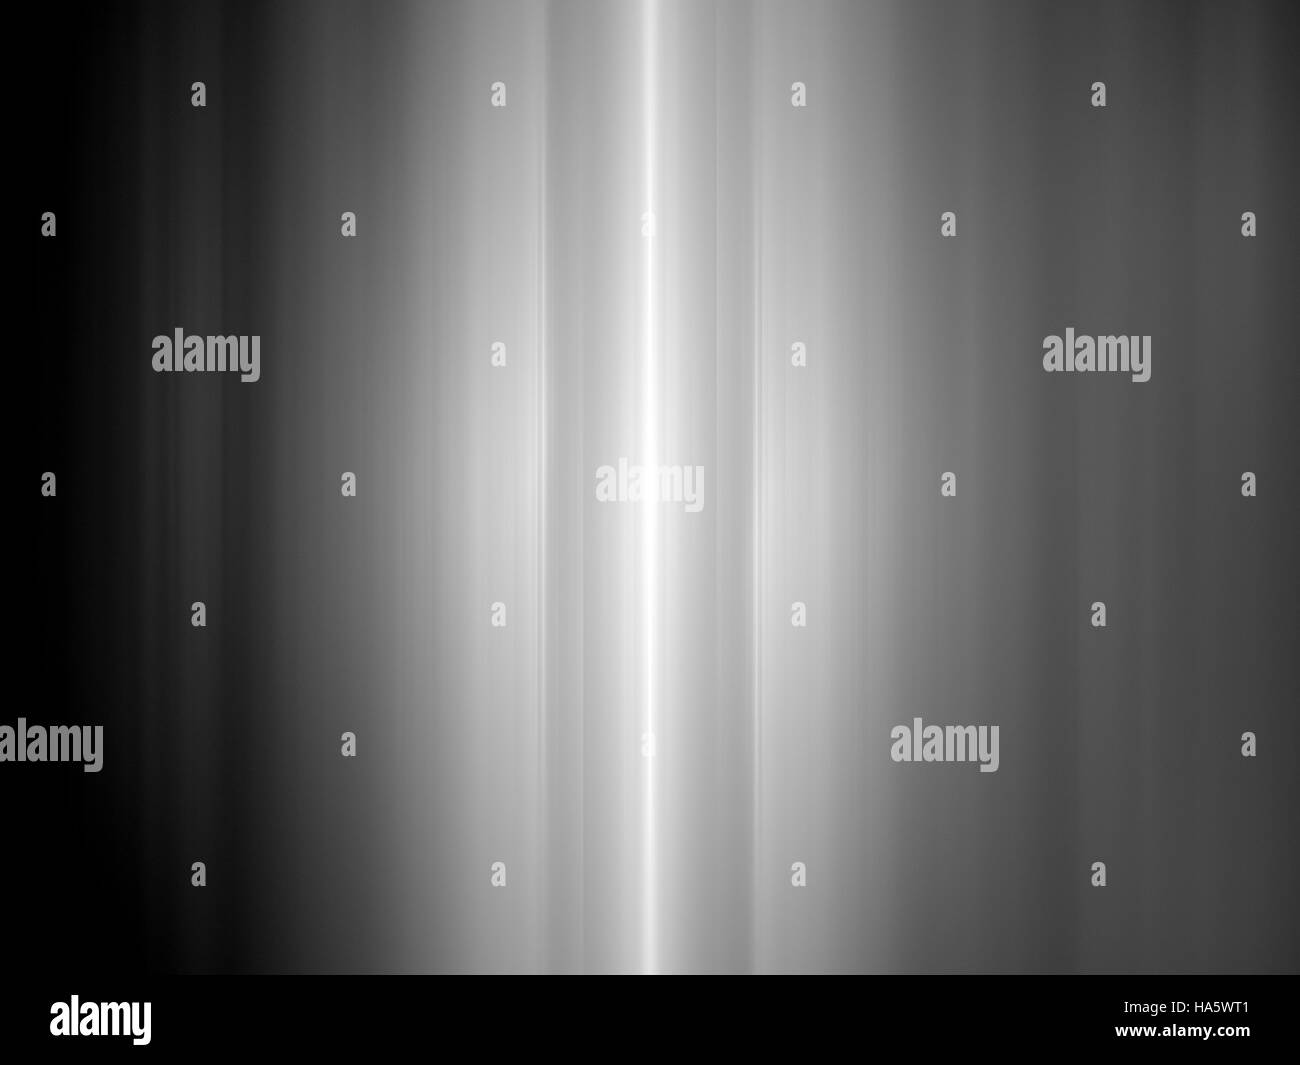 Black and white vertical motion blur, computer generated abstract intensity map, 3D render Stock Photo